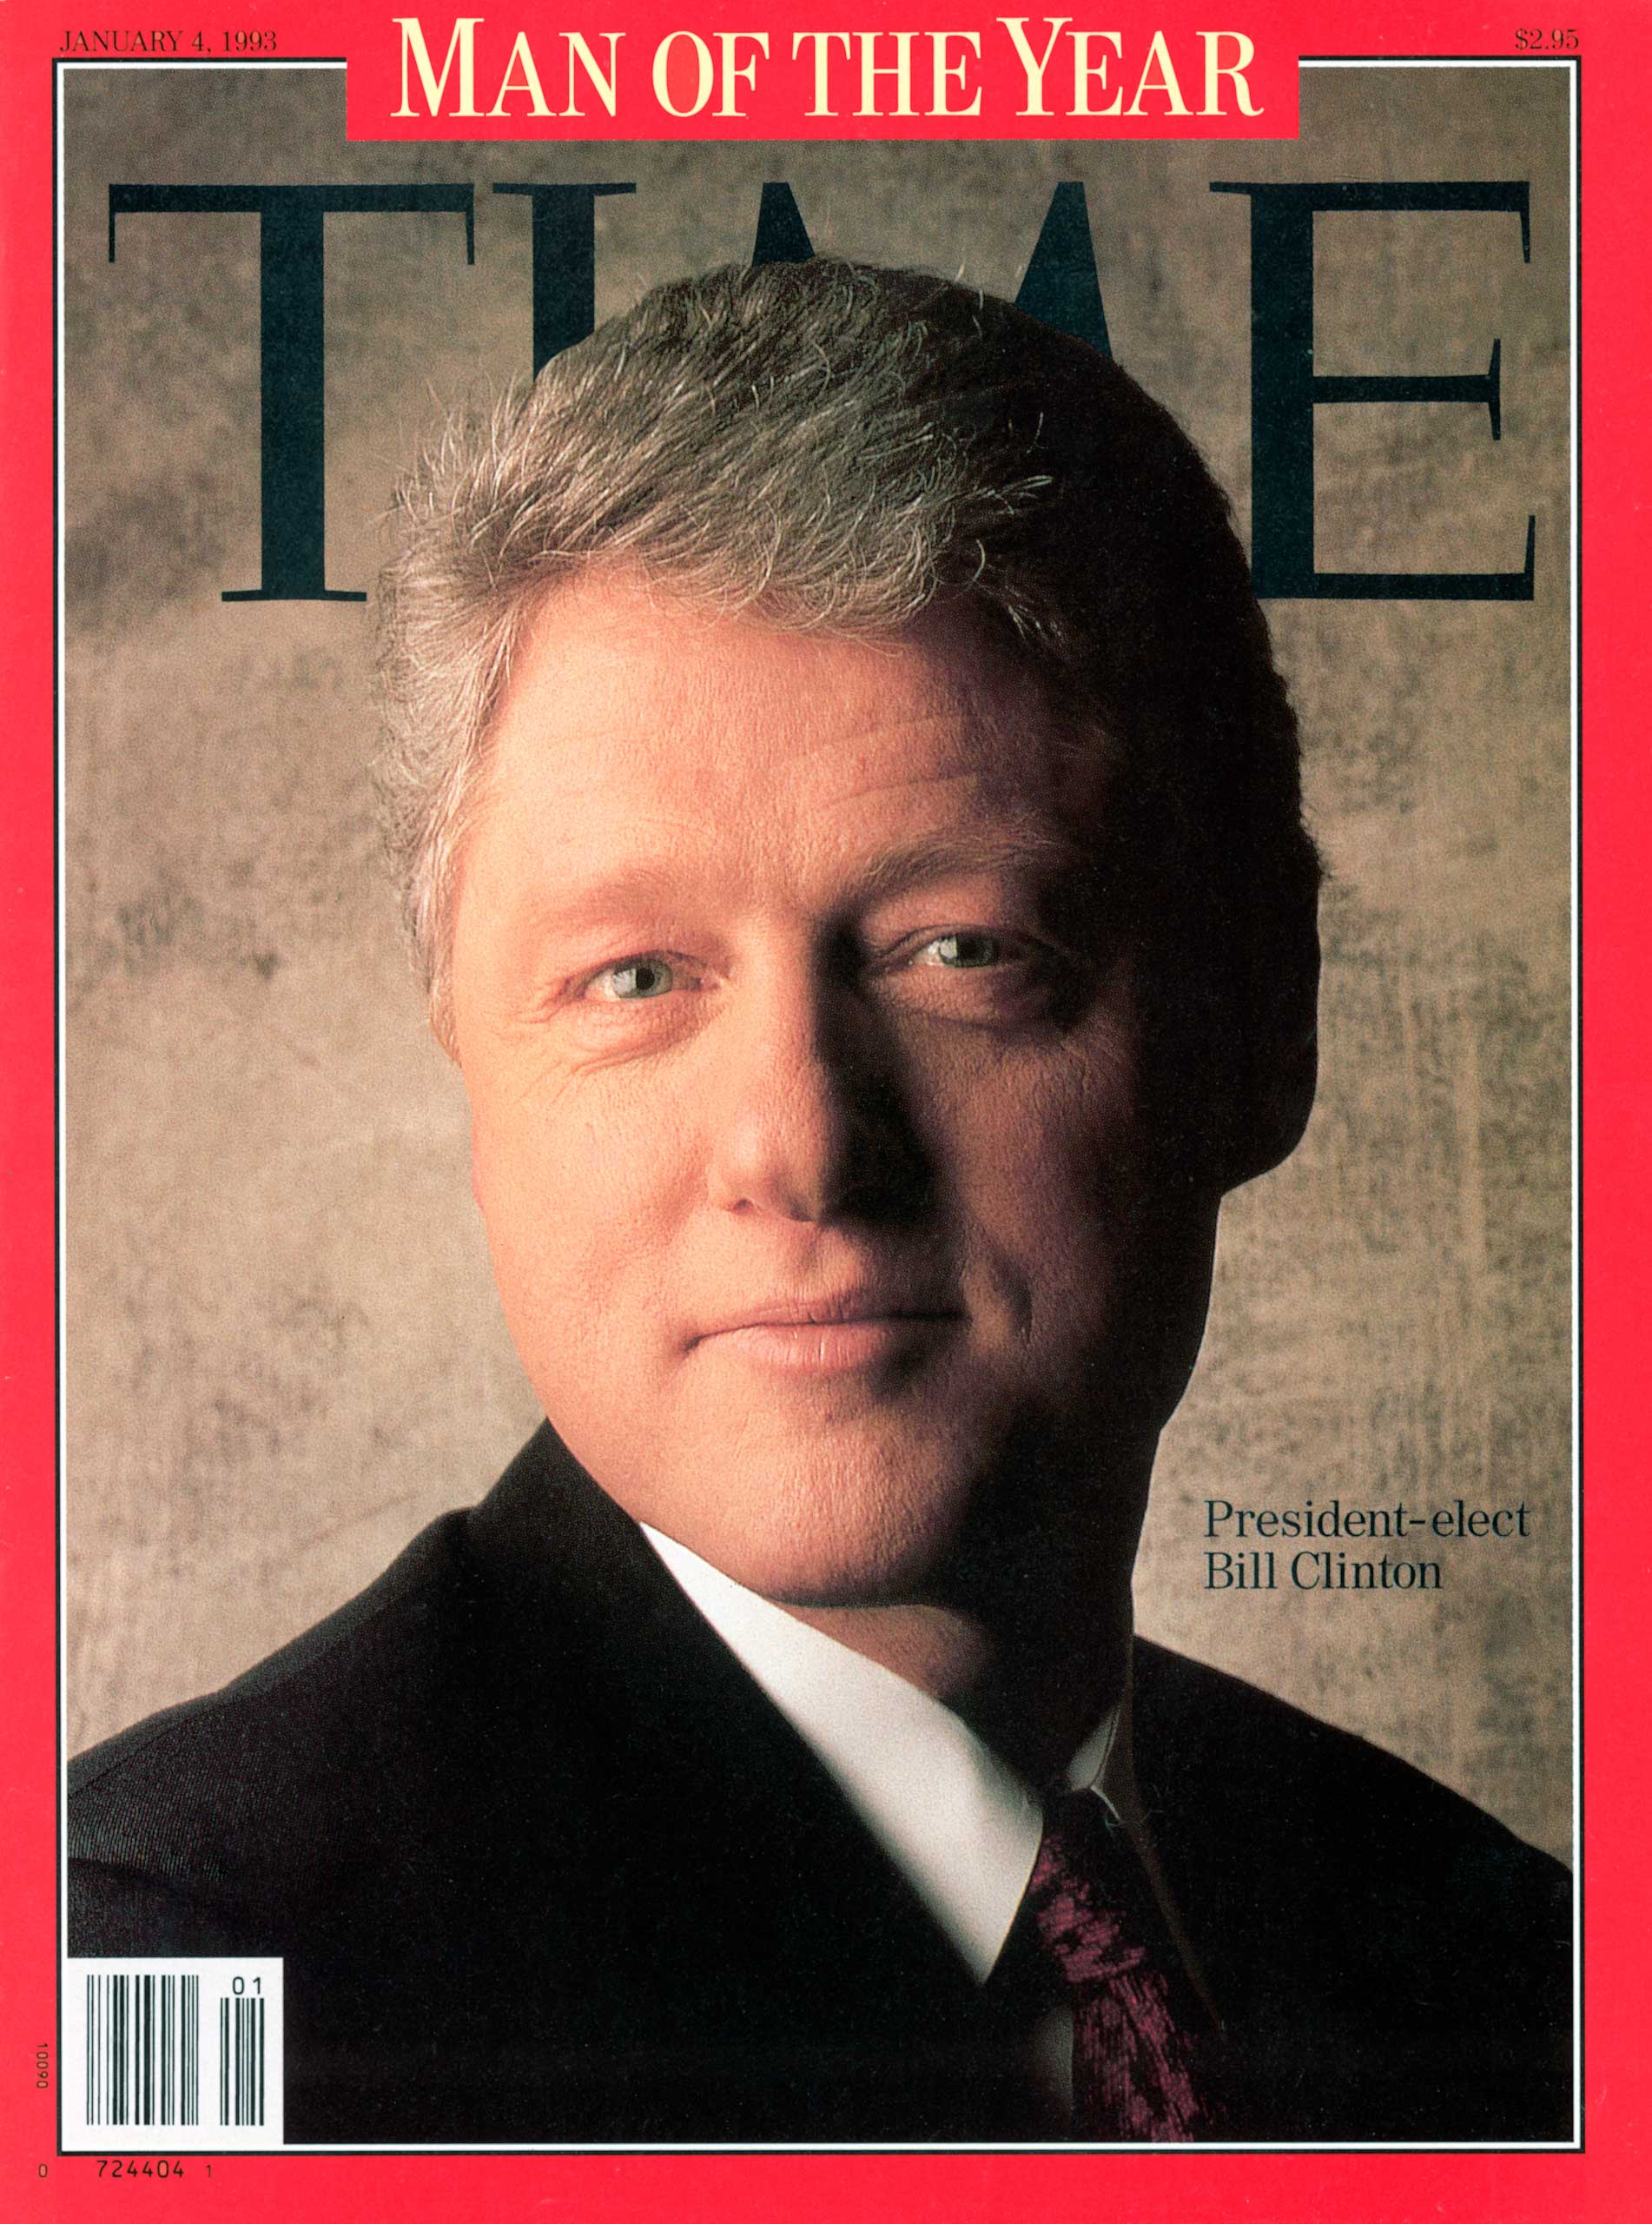 TIME COVERS - THE 90'S